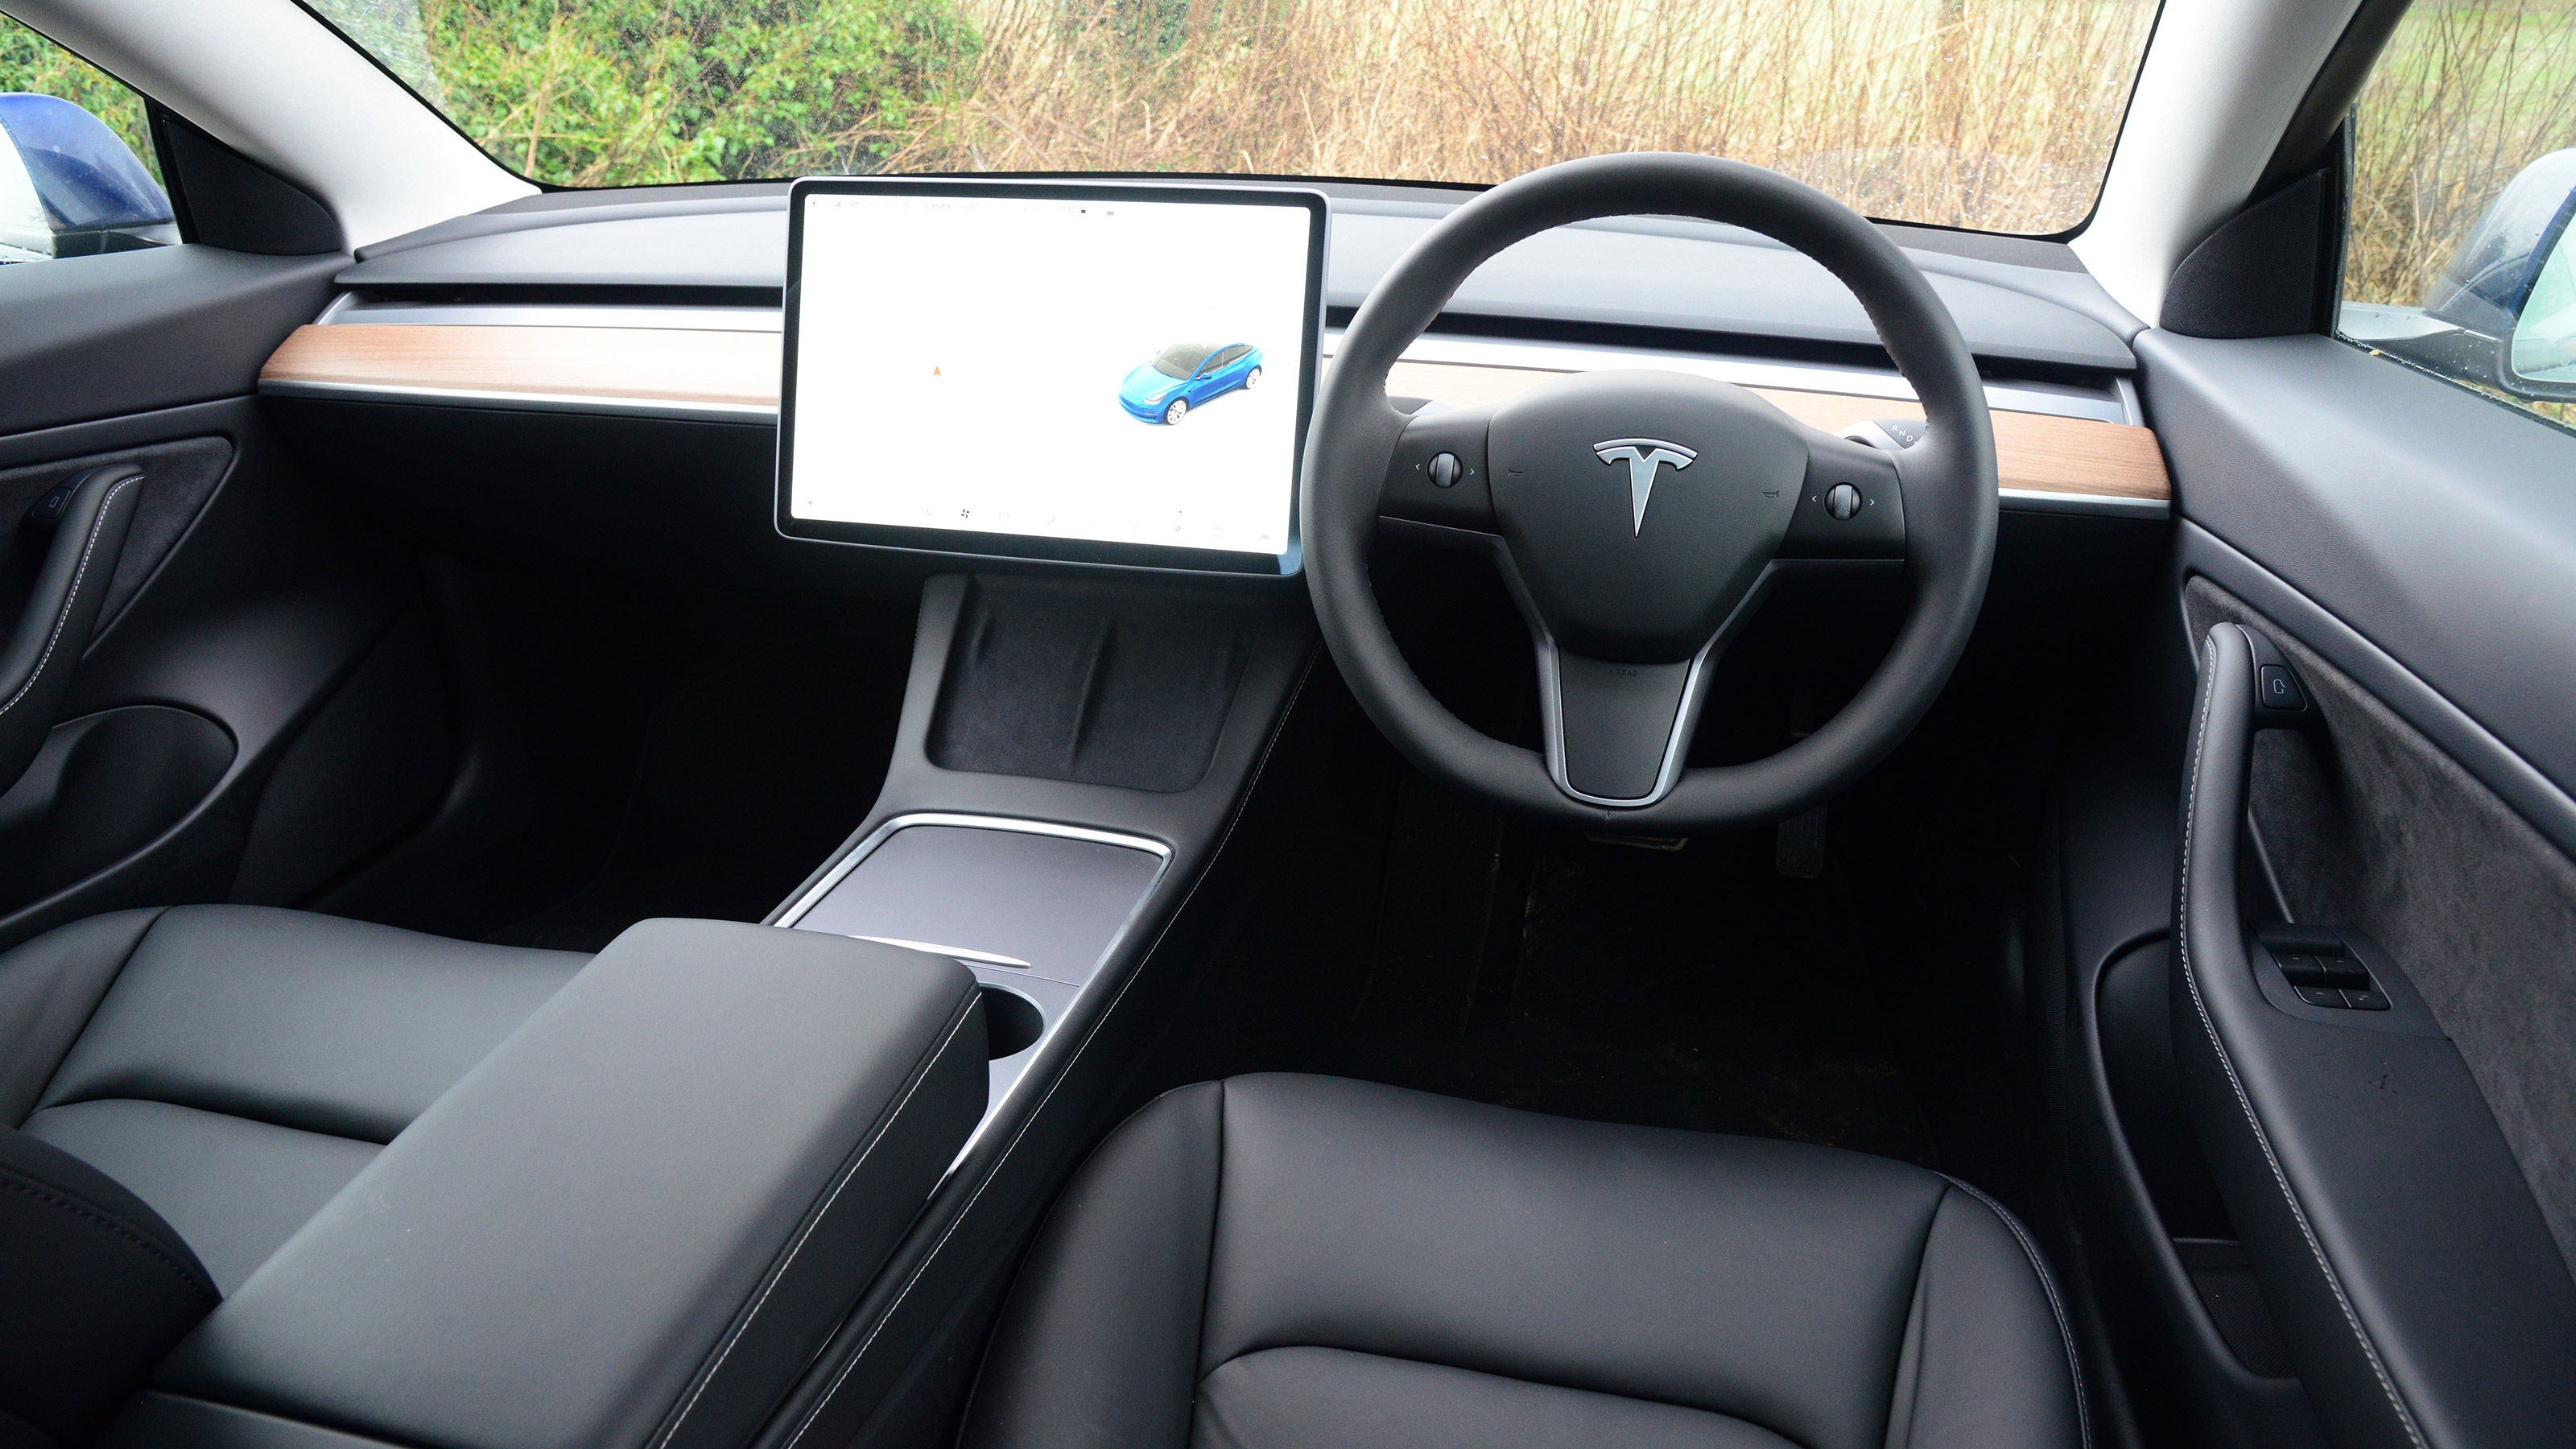 Upgrade Your Tesla Model 3: Top Interior & Exterior Add-Ons for Comfort, Style, and Protection